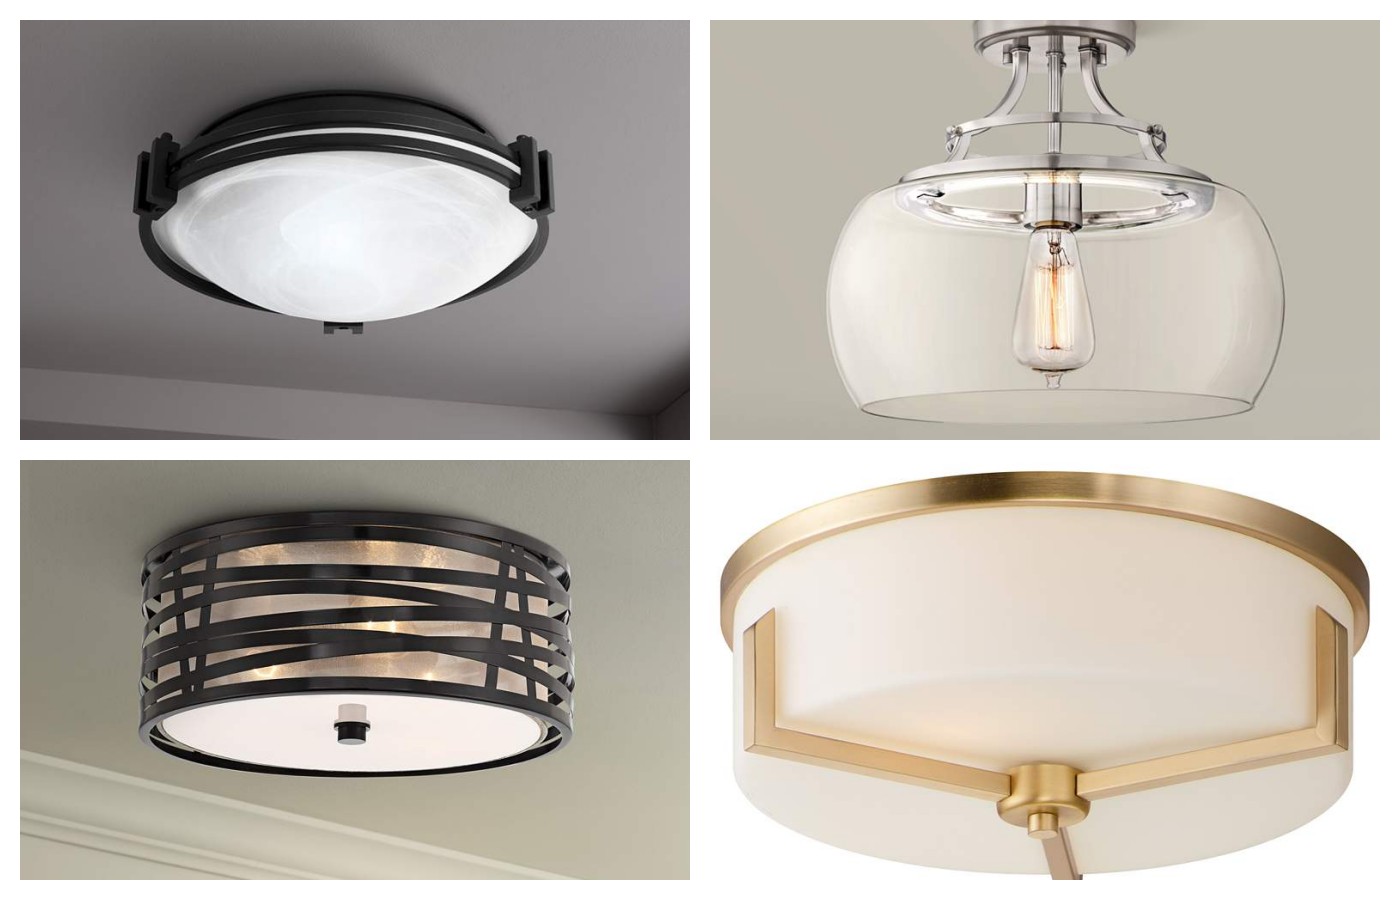 Light Up Your Room In Style: 8 Close To Ceiling Light Fixtures